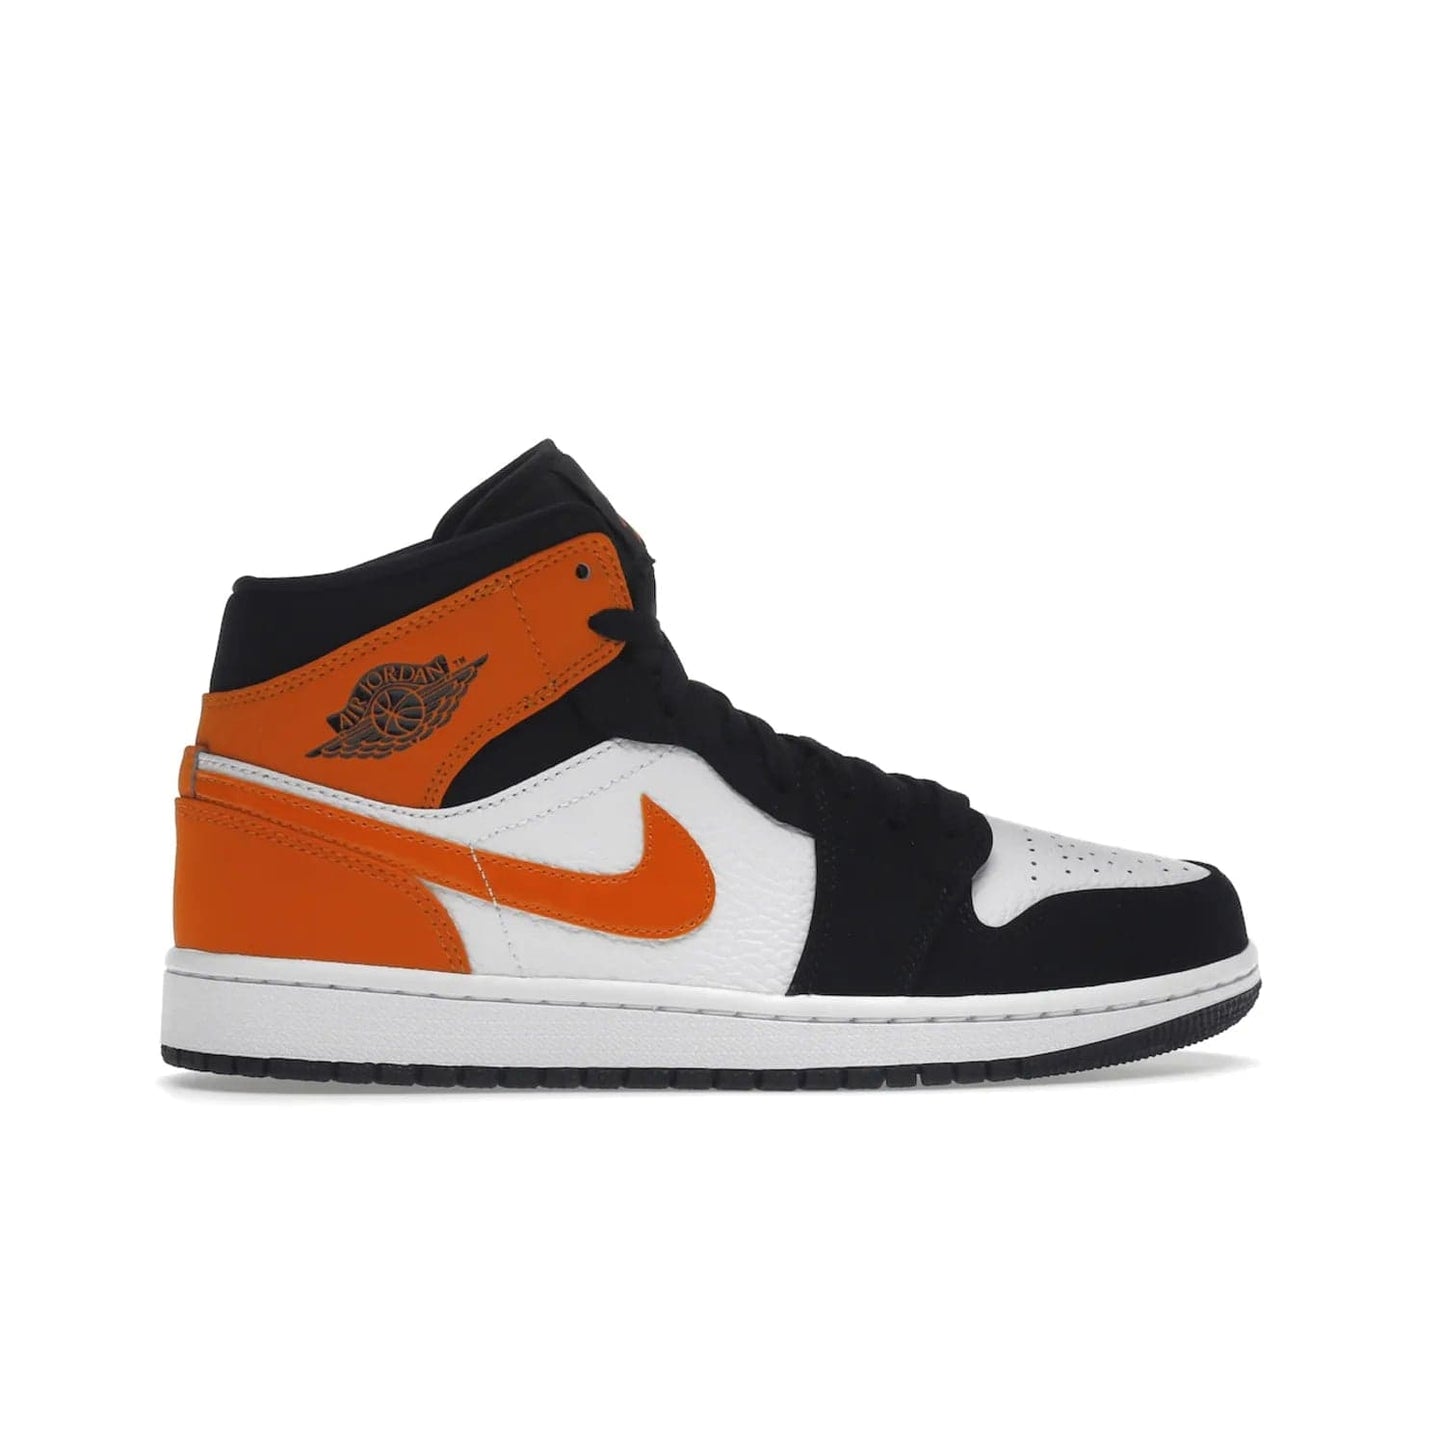 Jordan 1 Mid Shattered Backboard - Image 36 - Only at www.BallersClubKickz.com - The Air Jordan 1 Mid Shattered Backboard offers a timeless Black/White-Starfish colorway. Classic Swoosh logo and AJ insignia plus a shatterd backboard graphic on the insole. Get your pair today!